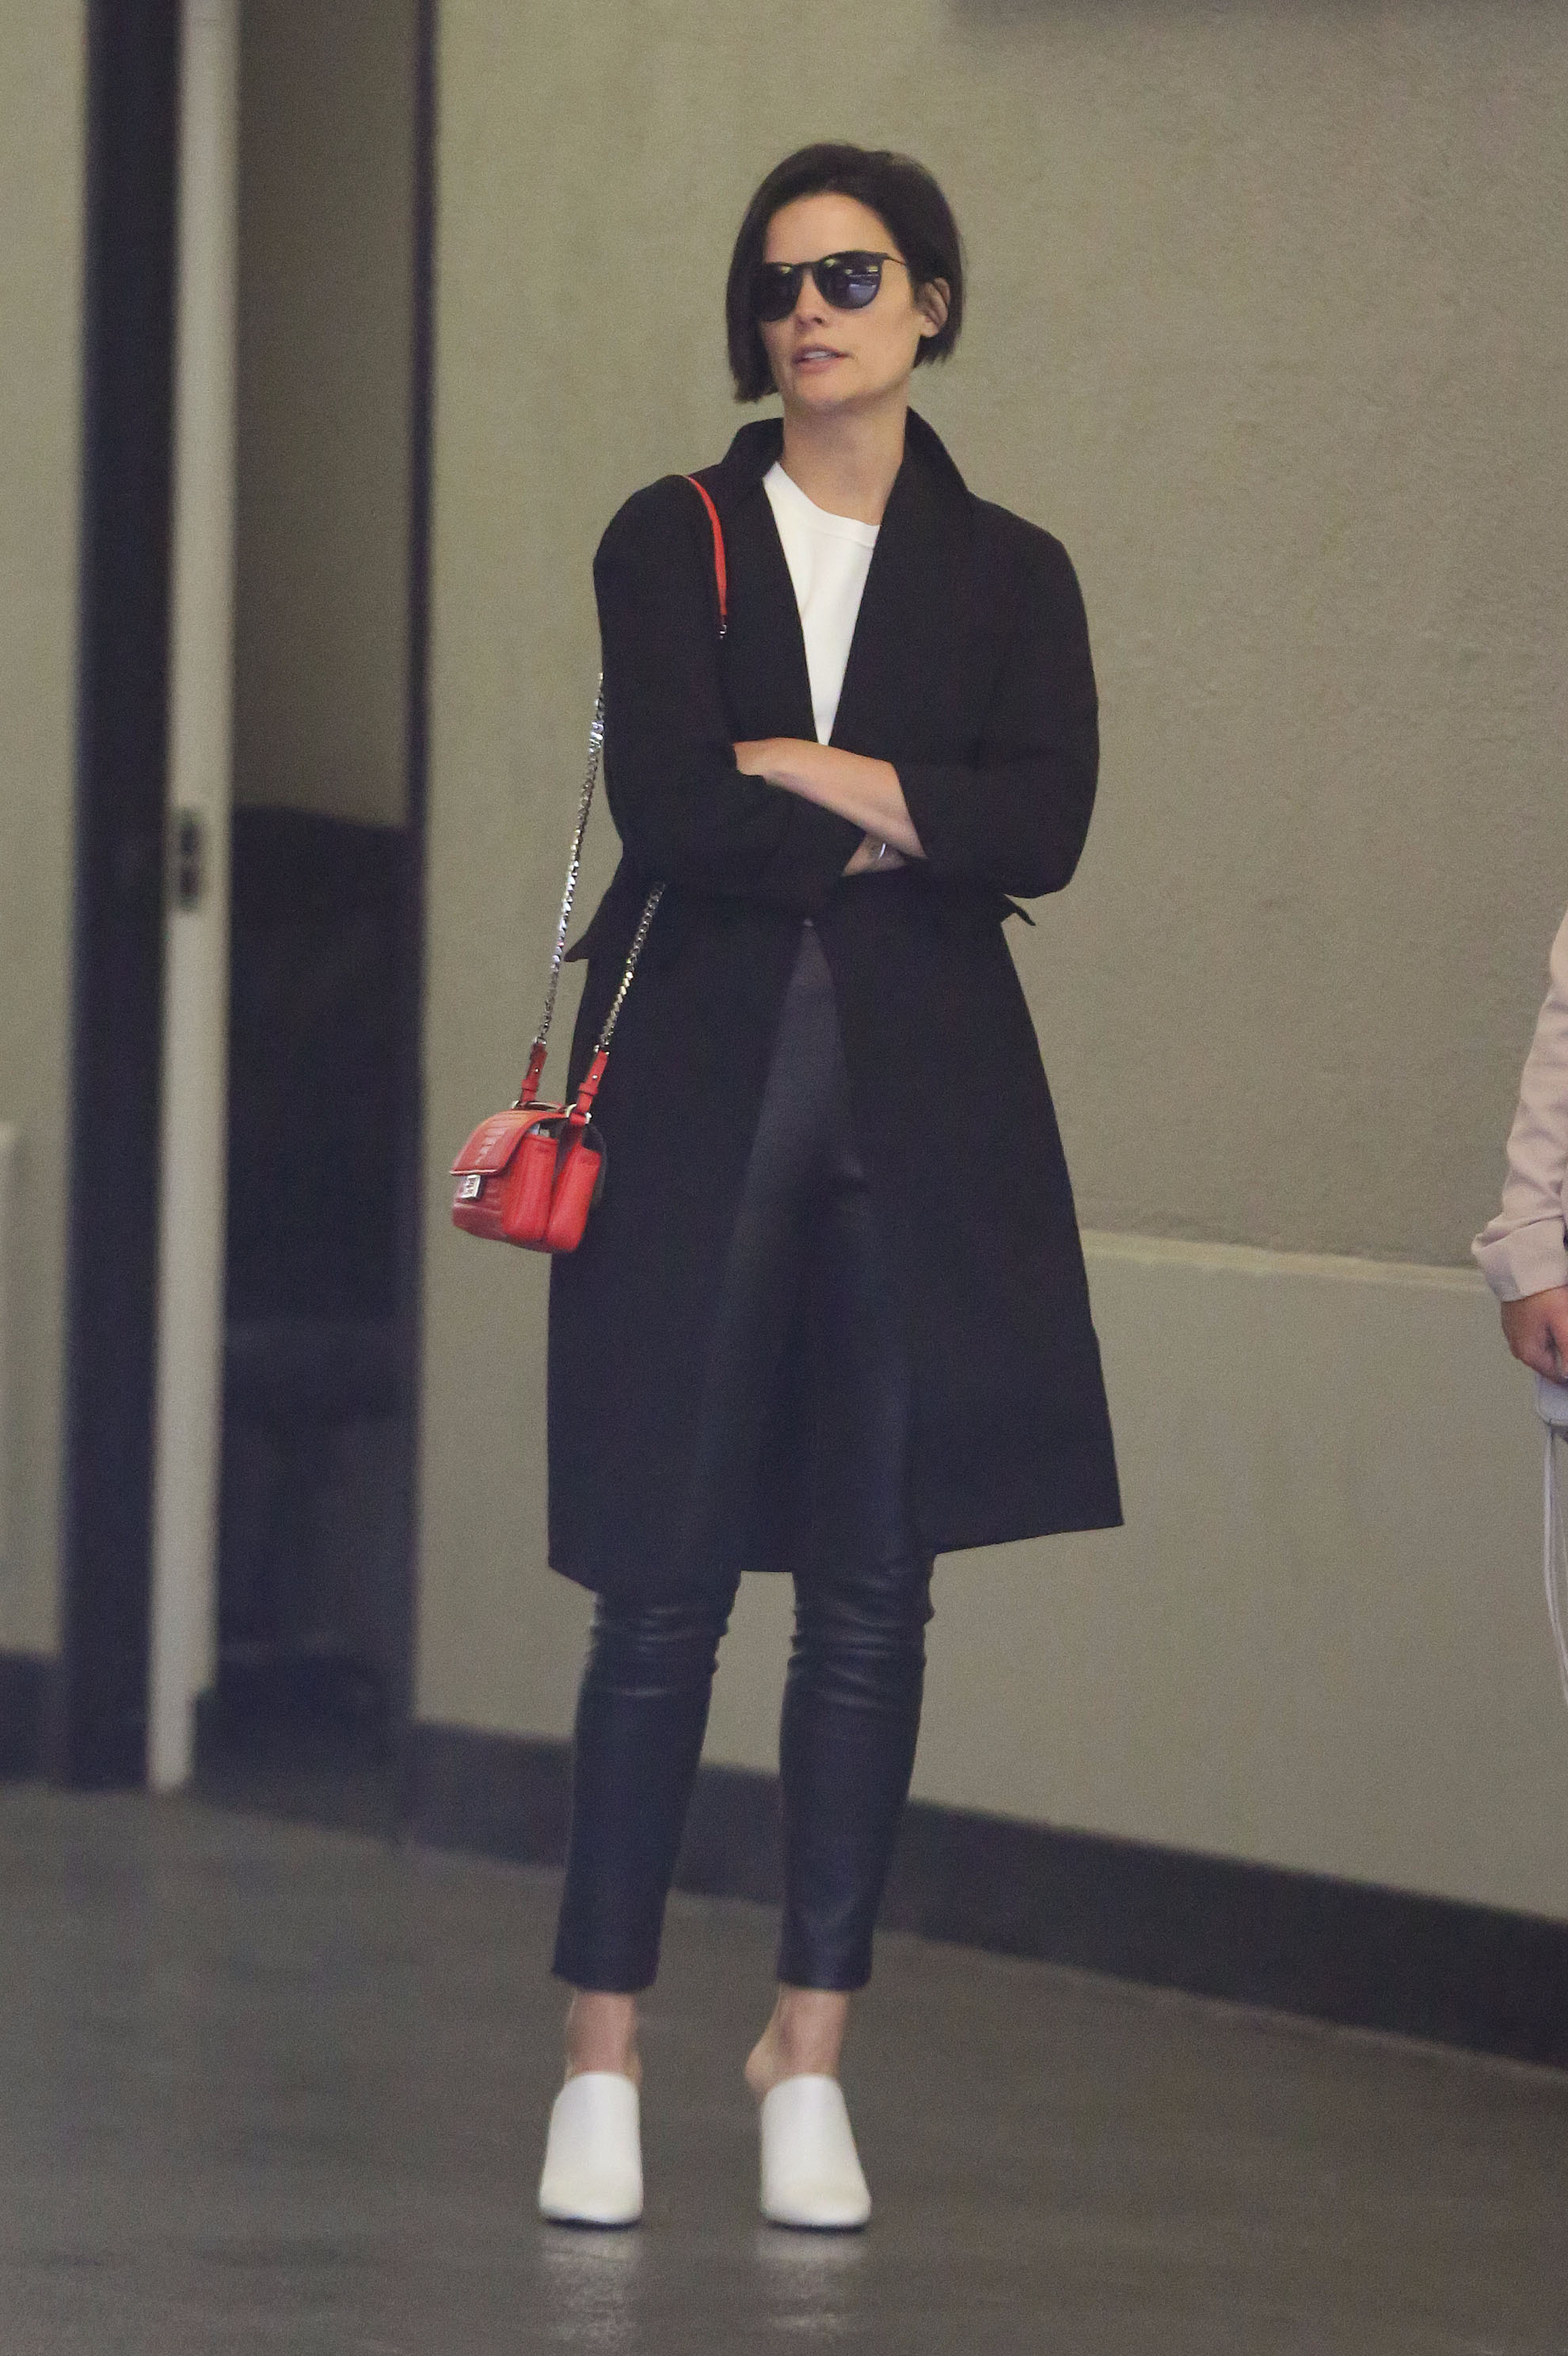 Jaimie Alexander out and about in West Hollywood